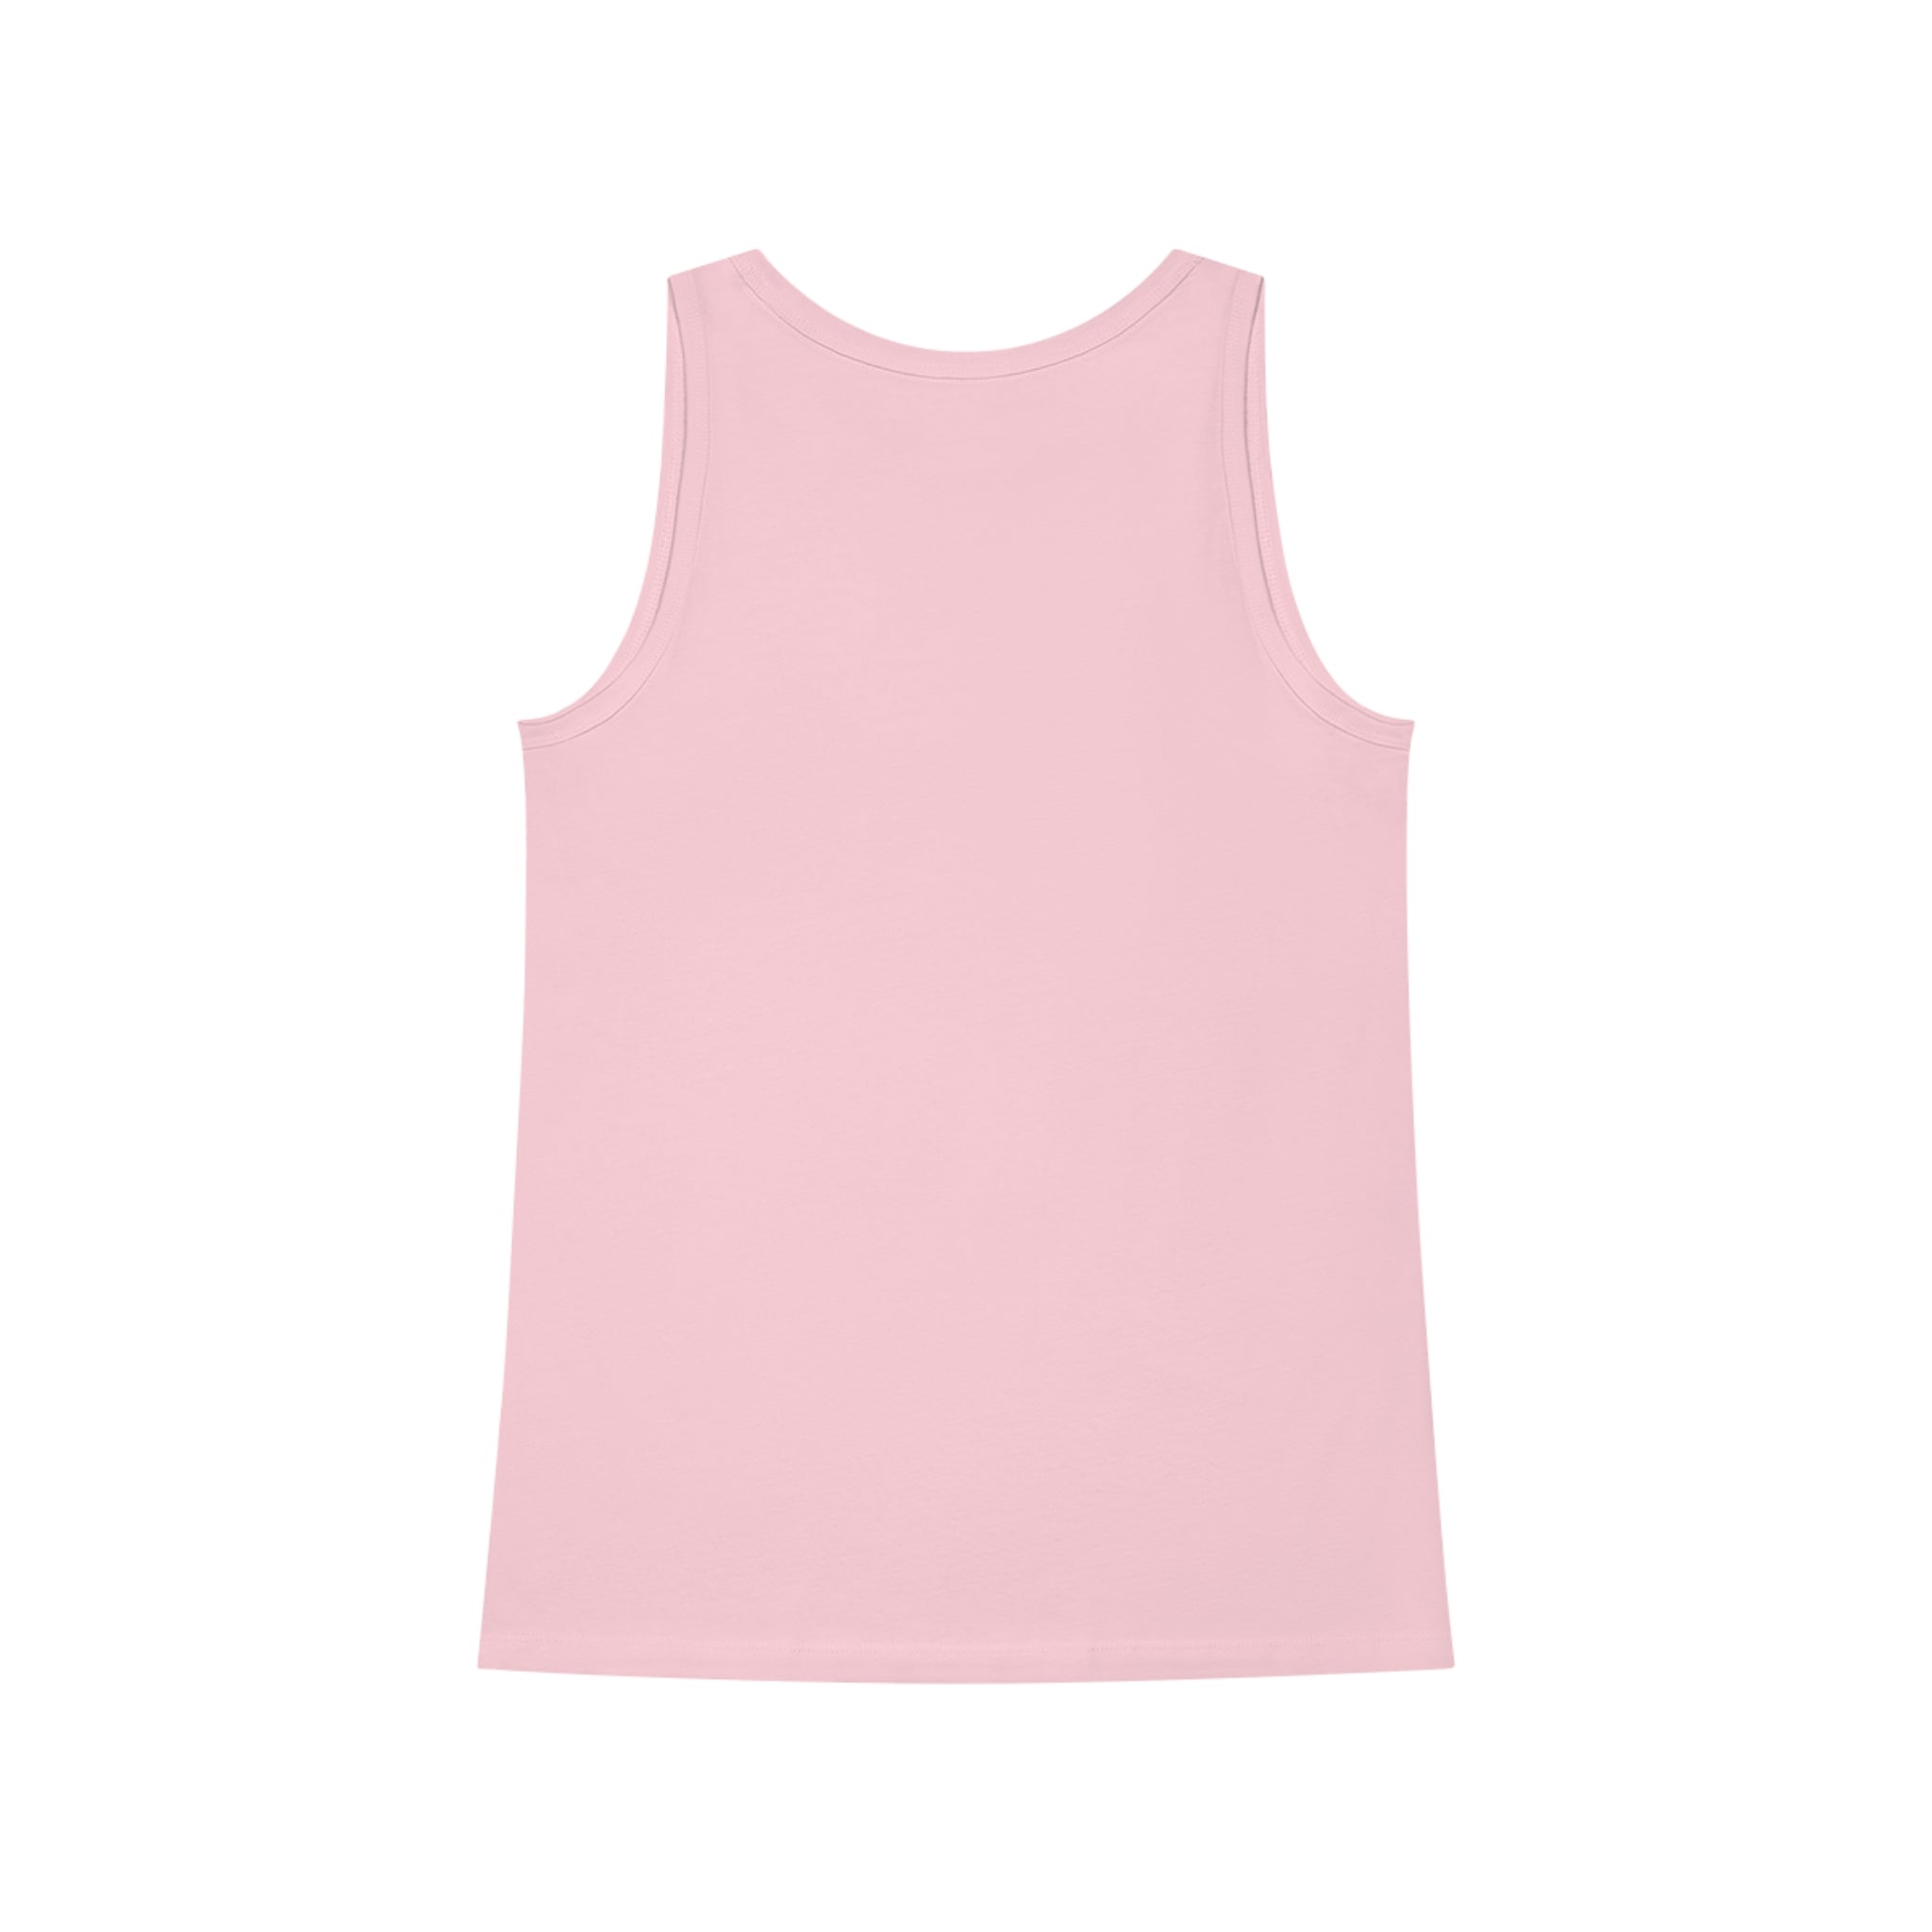 A Flower Red tank top on a white background.